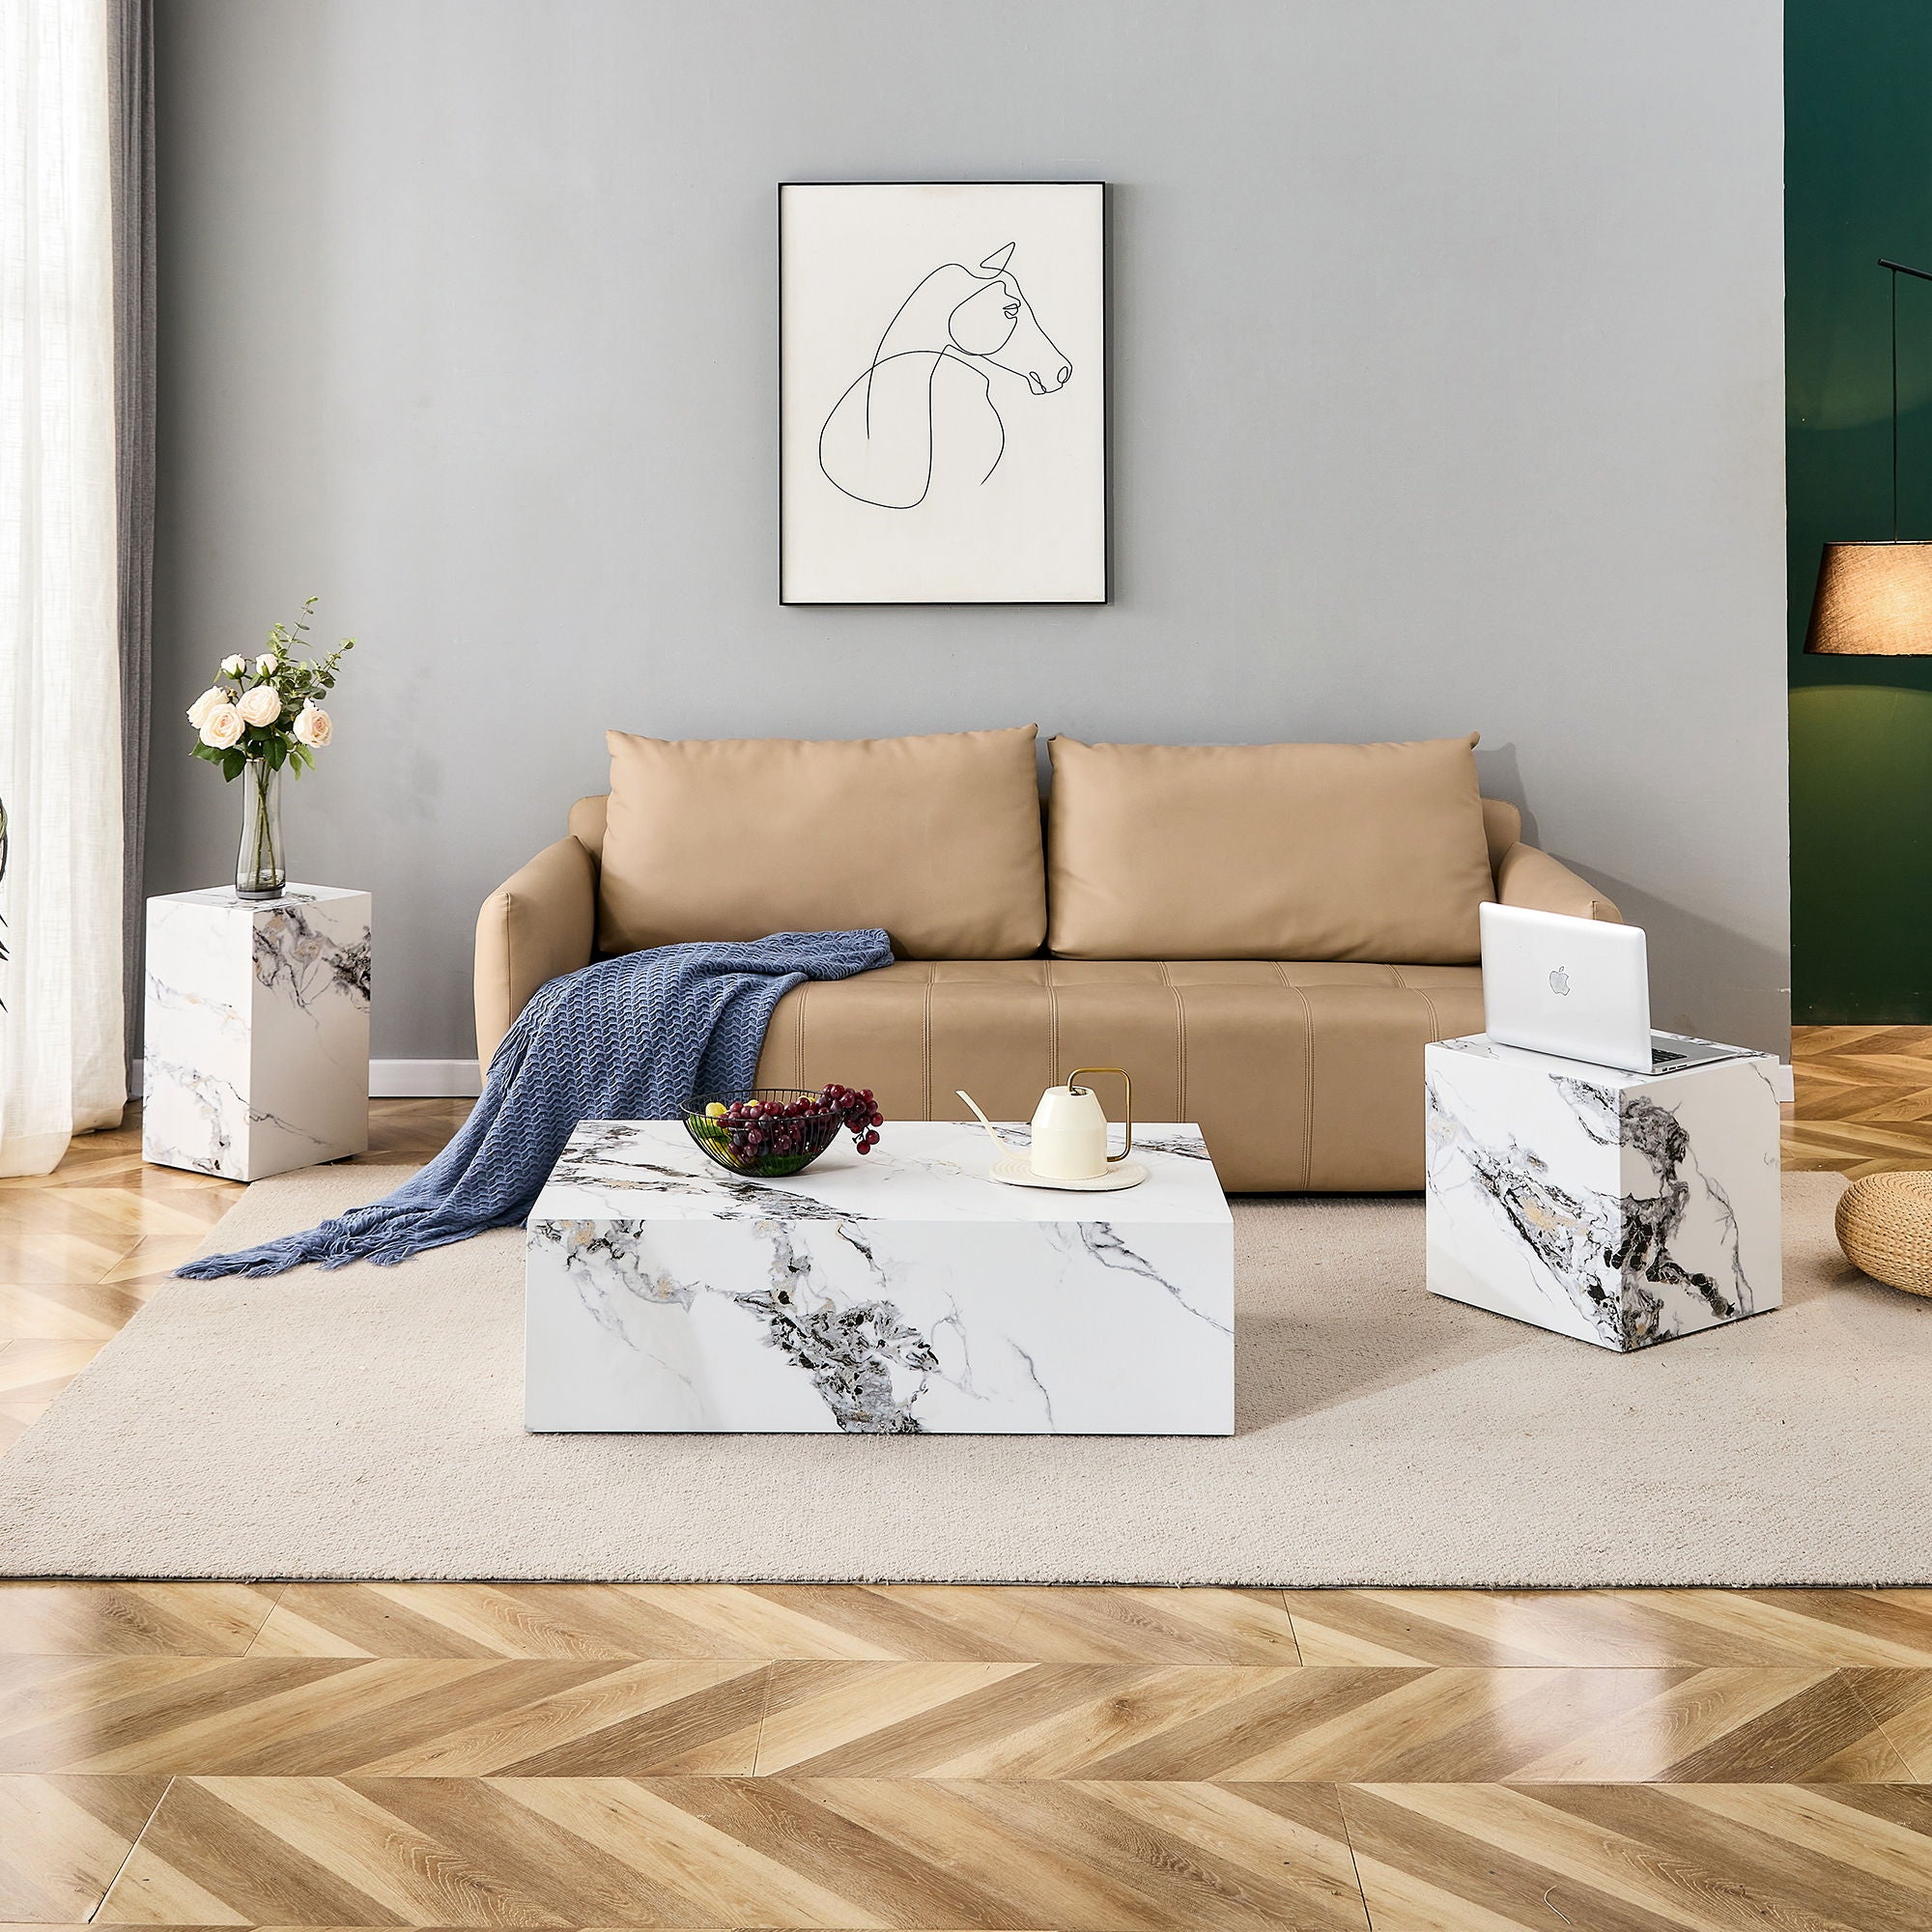 Modern 3 Piece Coffee Table Set - Marble Patterns